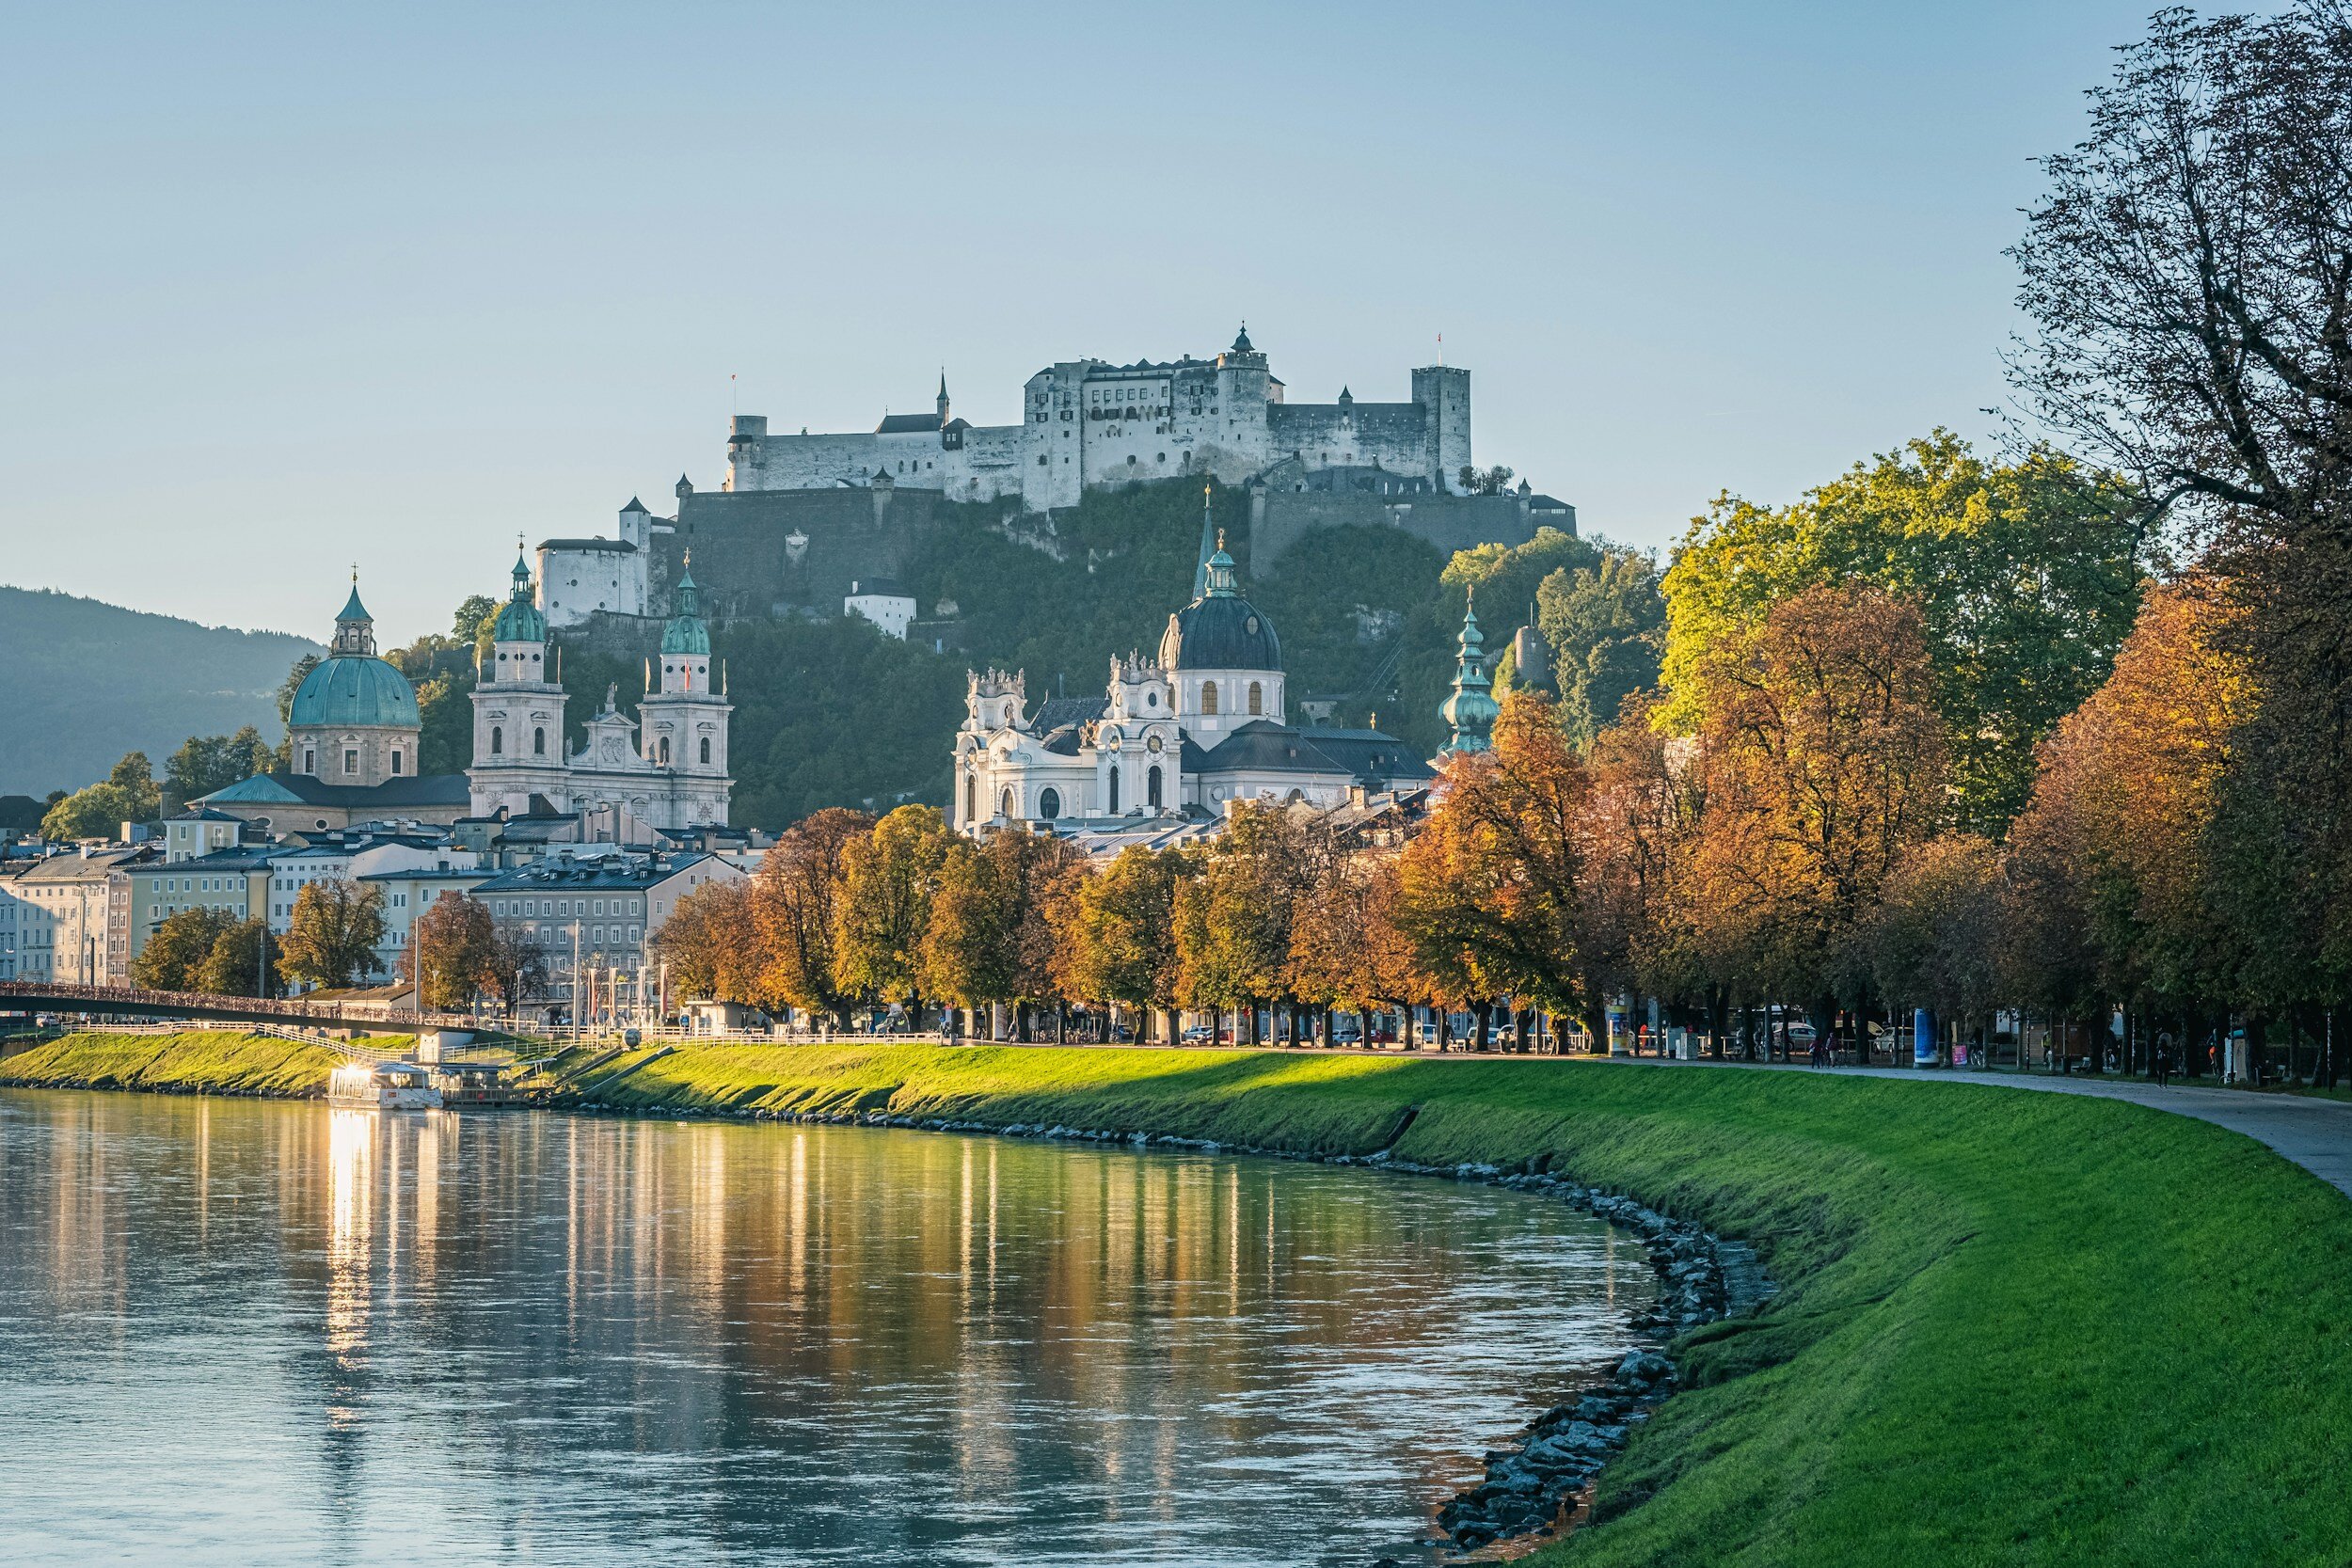  hohensalzburg fortress 
Hohensalzburg Fortress is a real eye-catcher high above the baroque towers of the city. As a landmark visible from afar, the castle is an unmistakable part of Salzburg's world-famous skyline. It appears mighty to the 